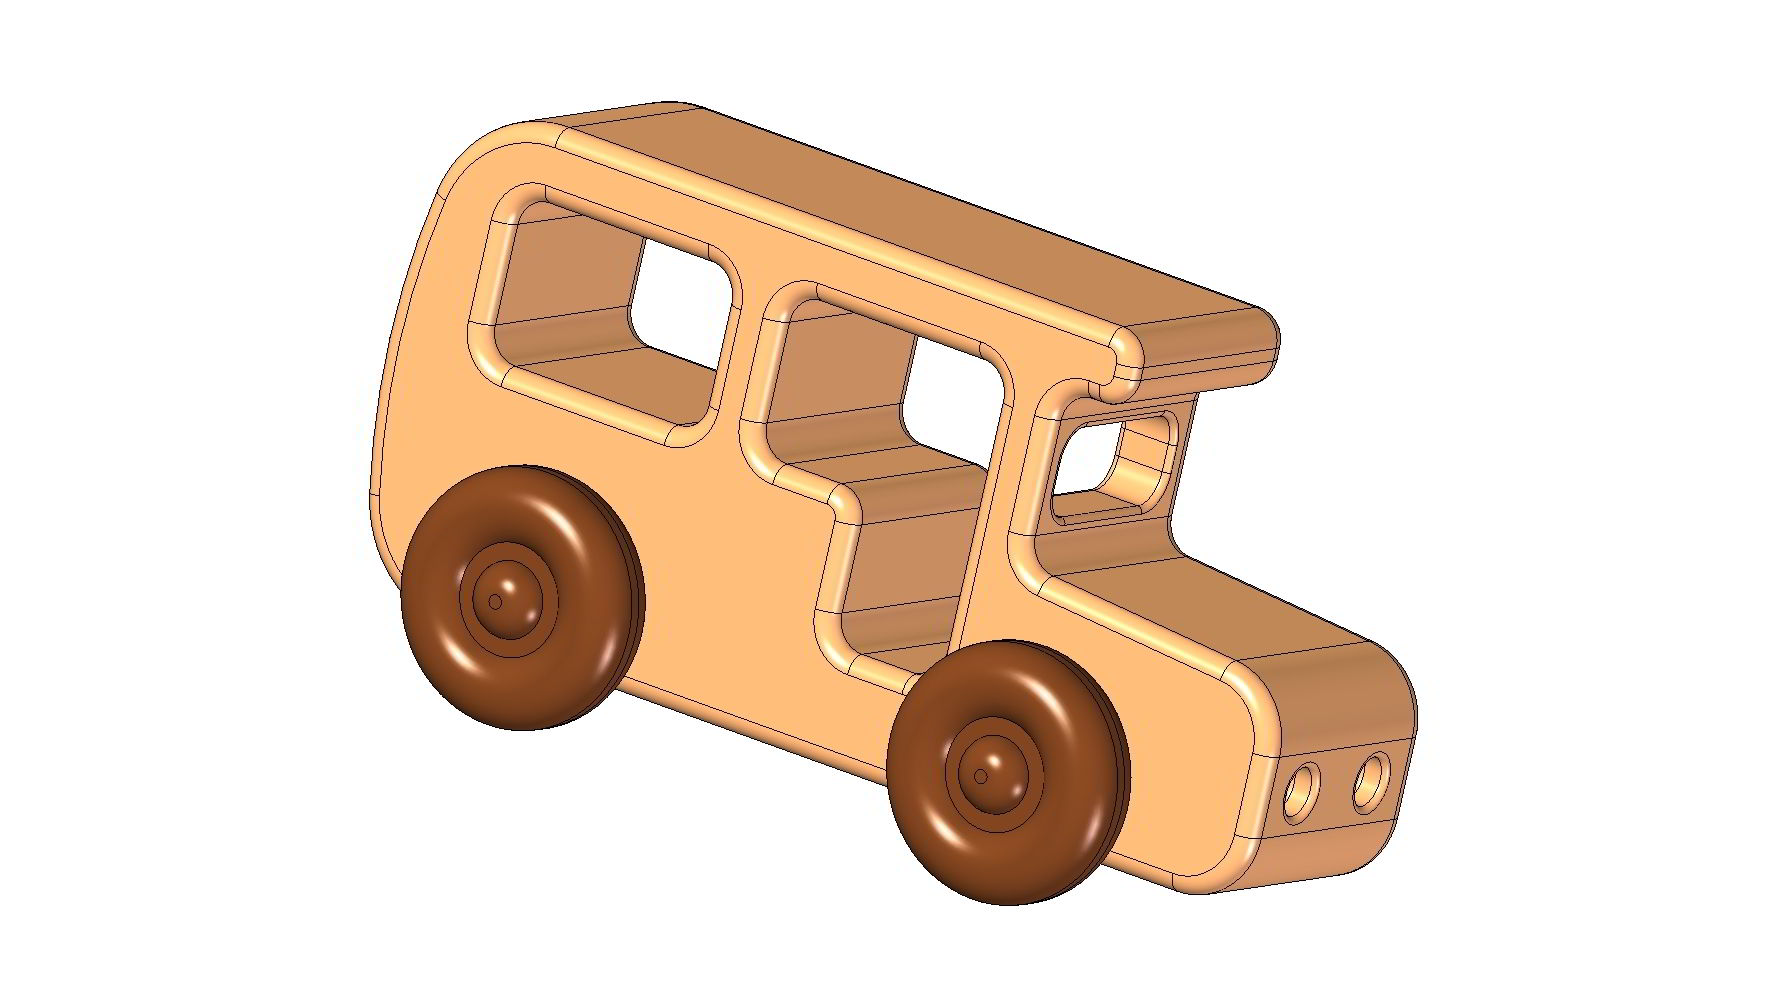 Wooden Toy Plans Free Downloads